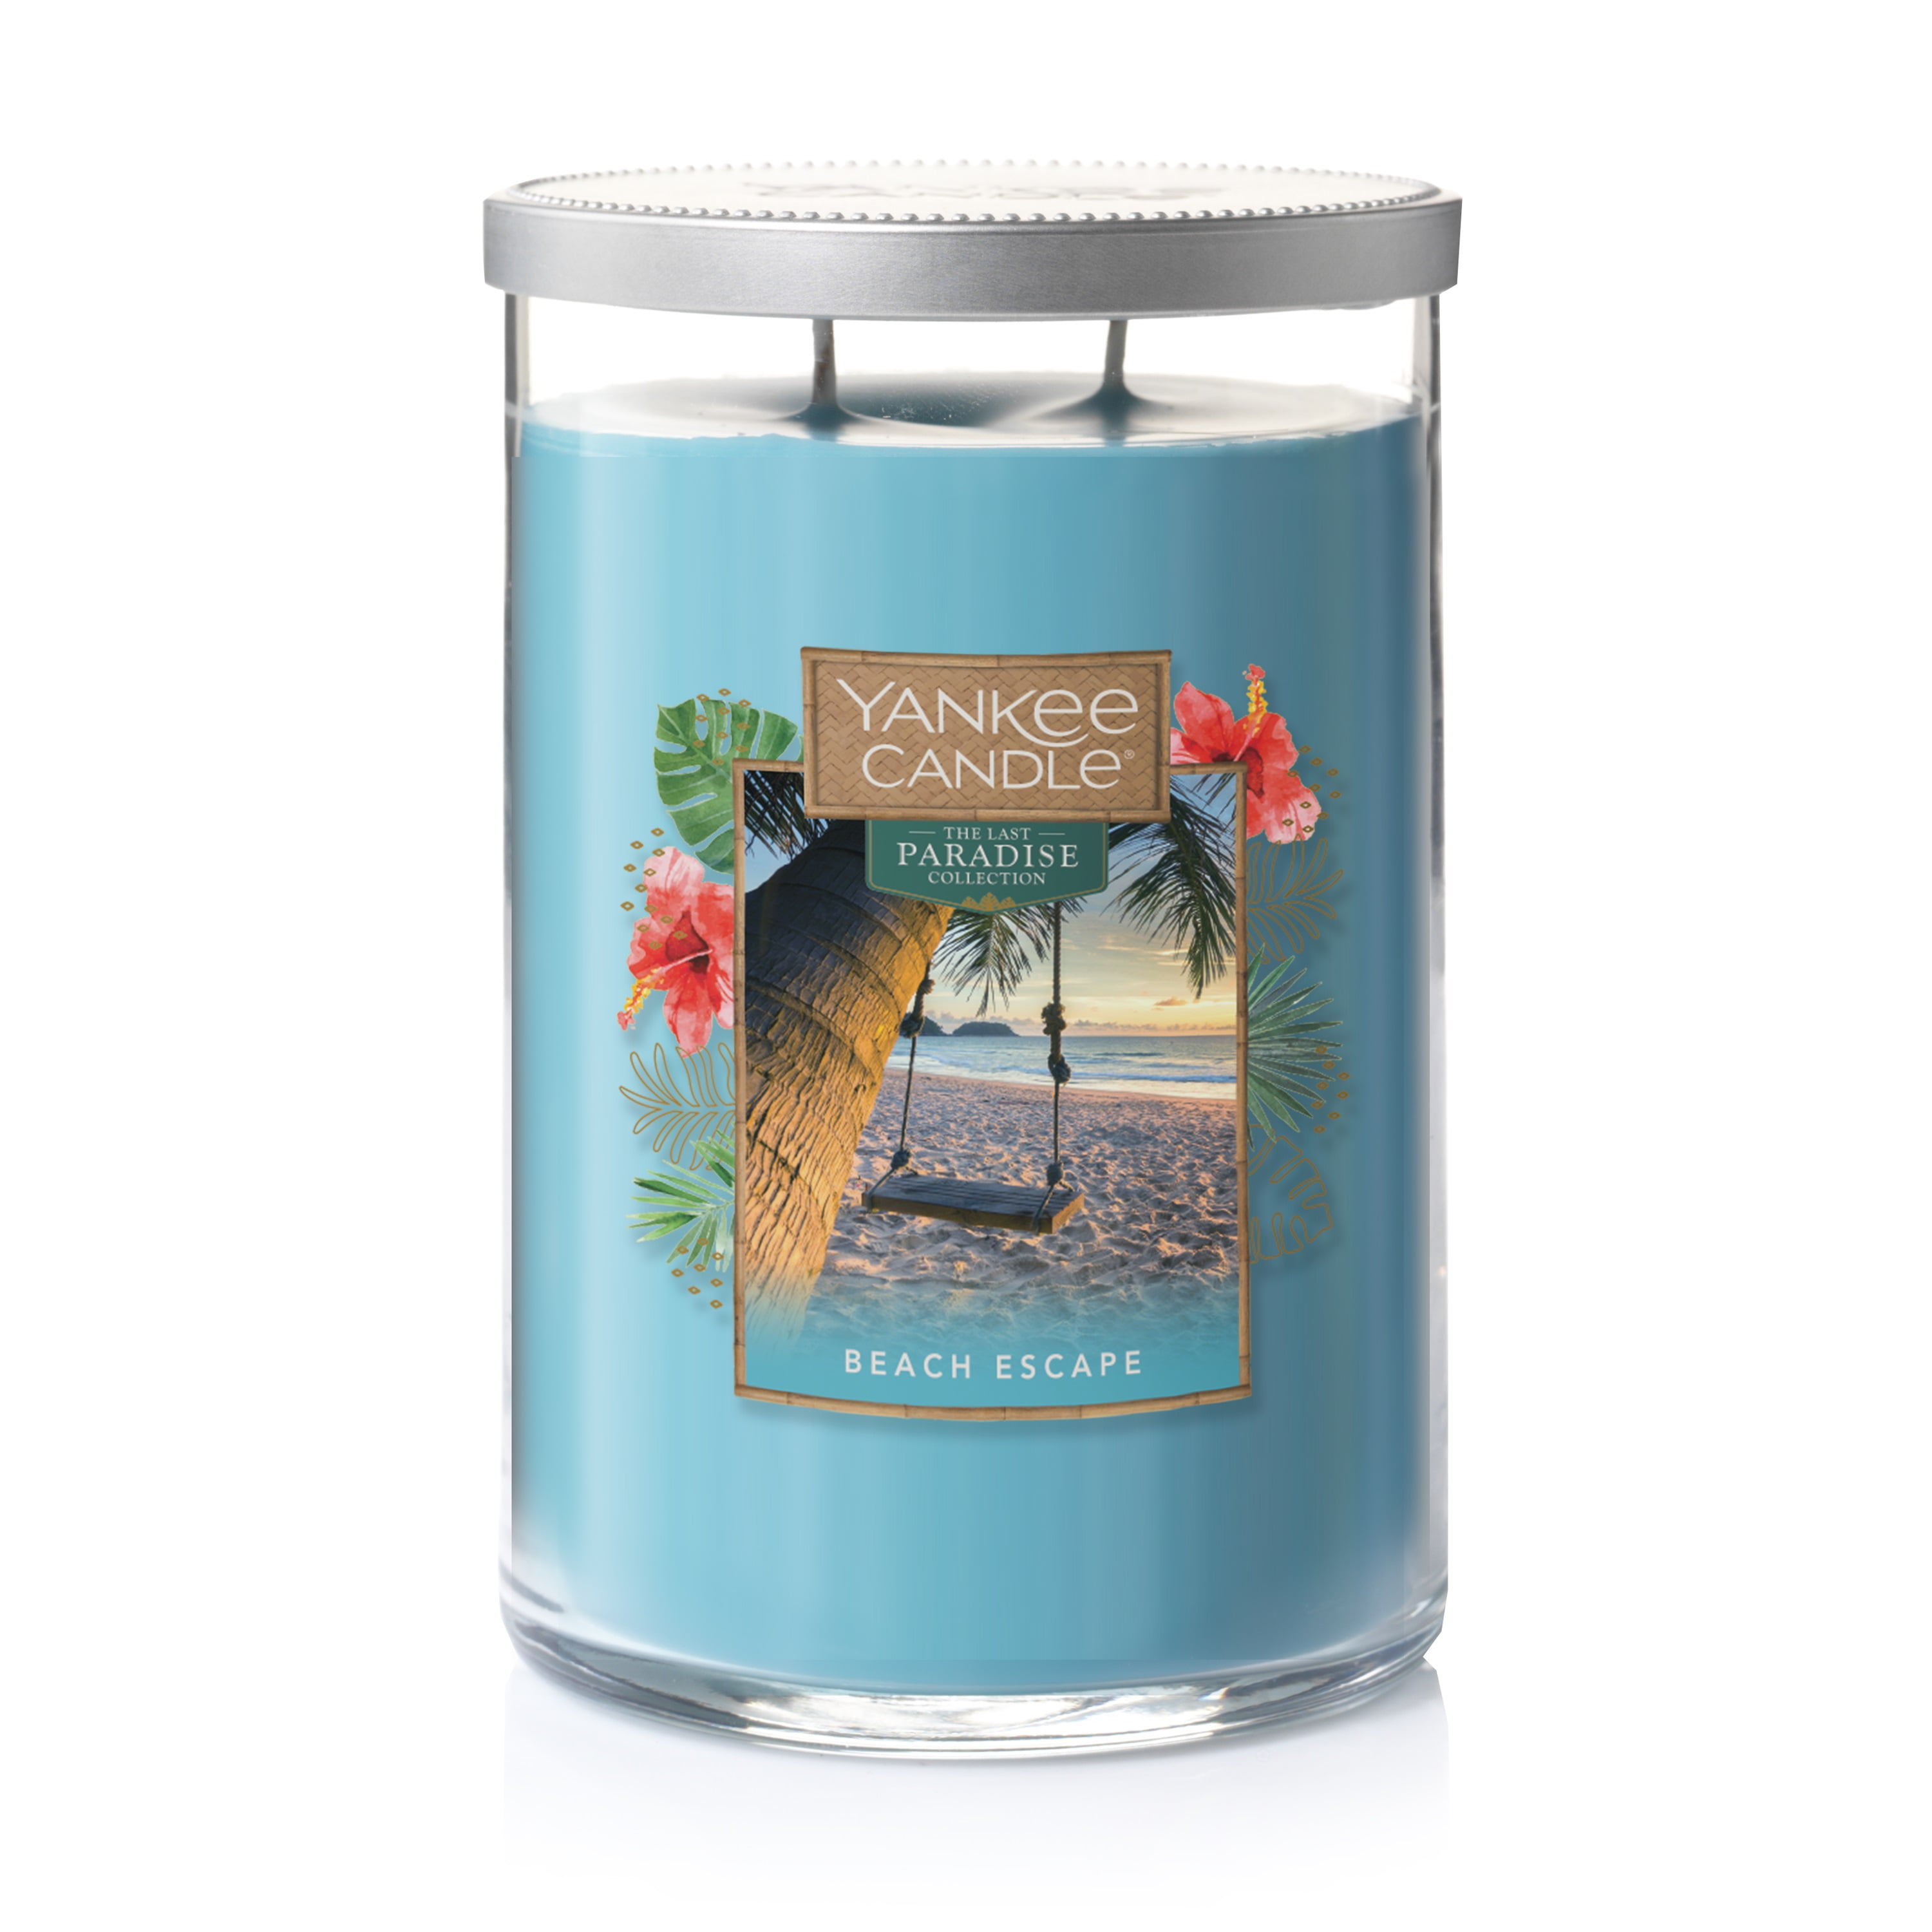 NEW Yankee Candle Moonlit Blossoms 2-Wick 22 OZ Burn Time 75 to 110 hrs 